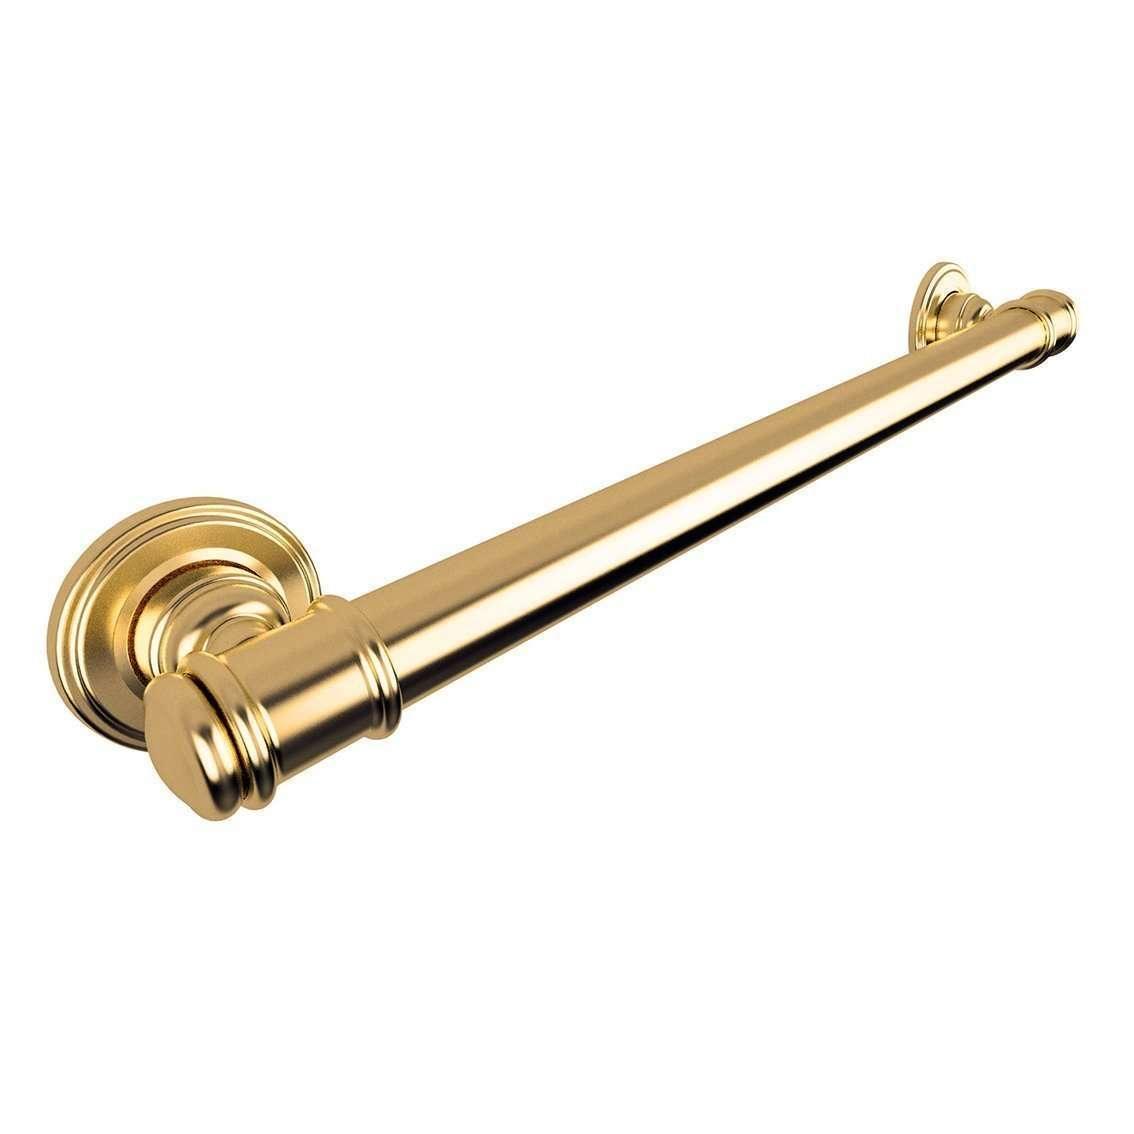 Availcare Glance Rail 600mm Gold - Burdens Plumbing